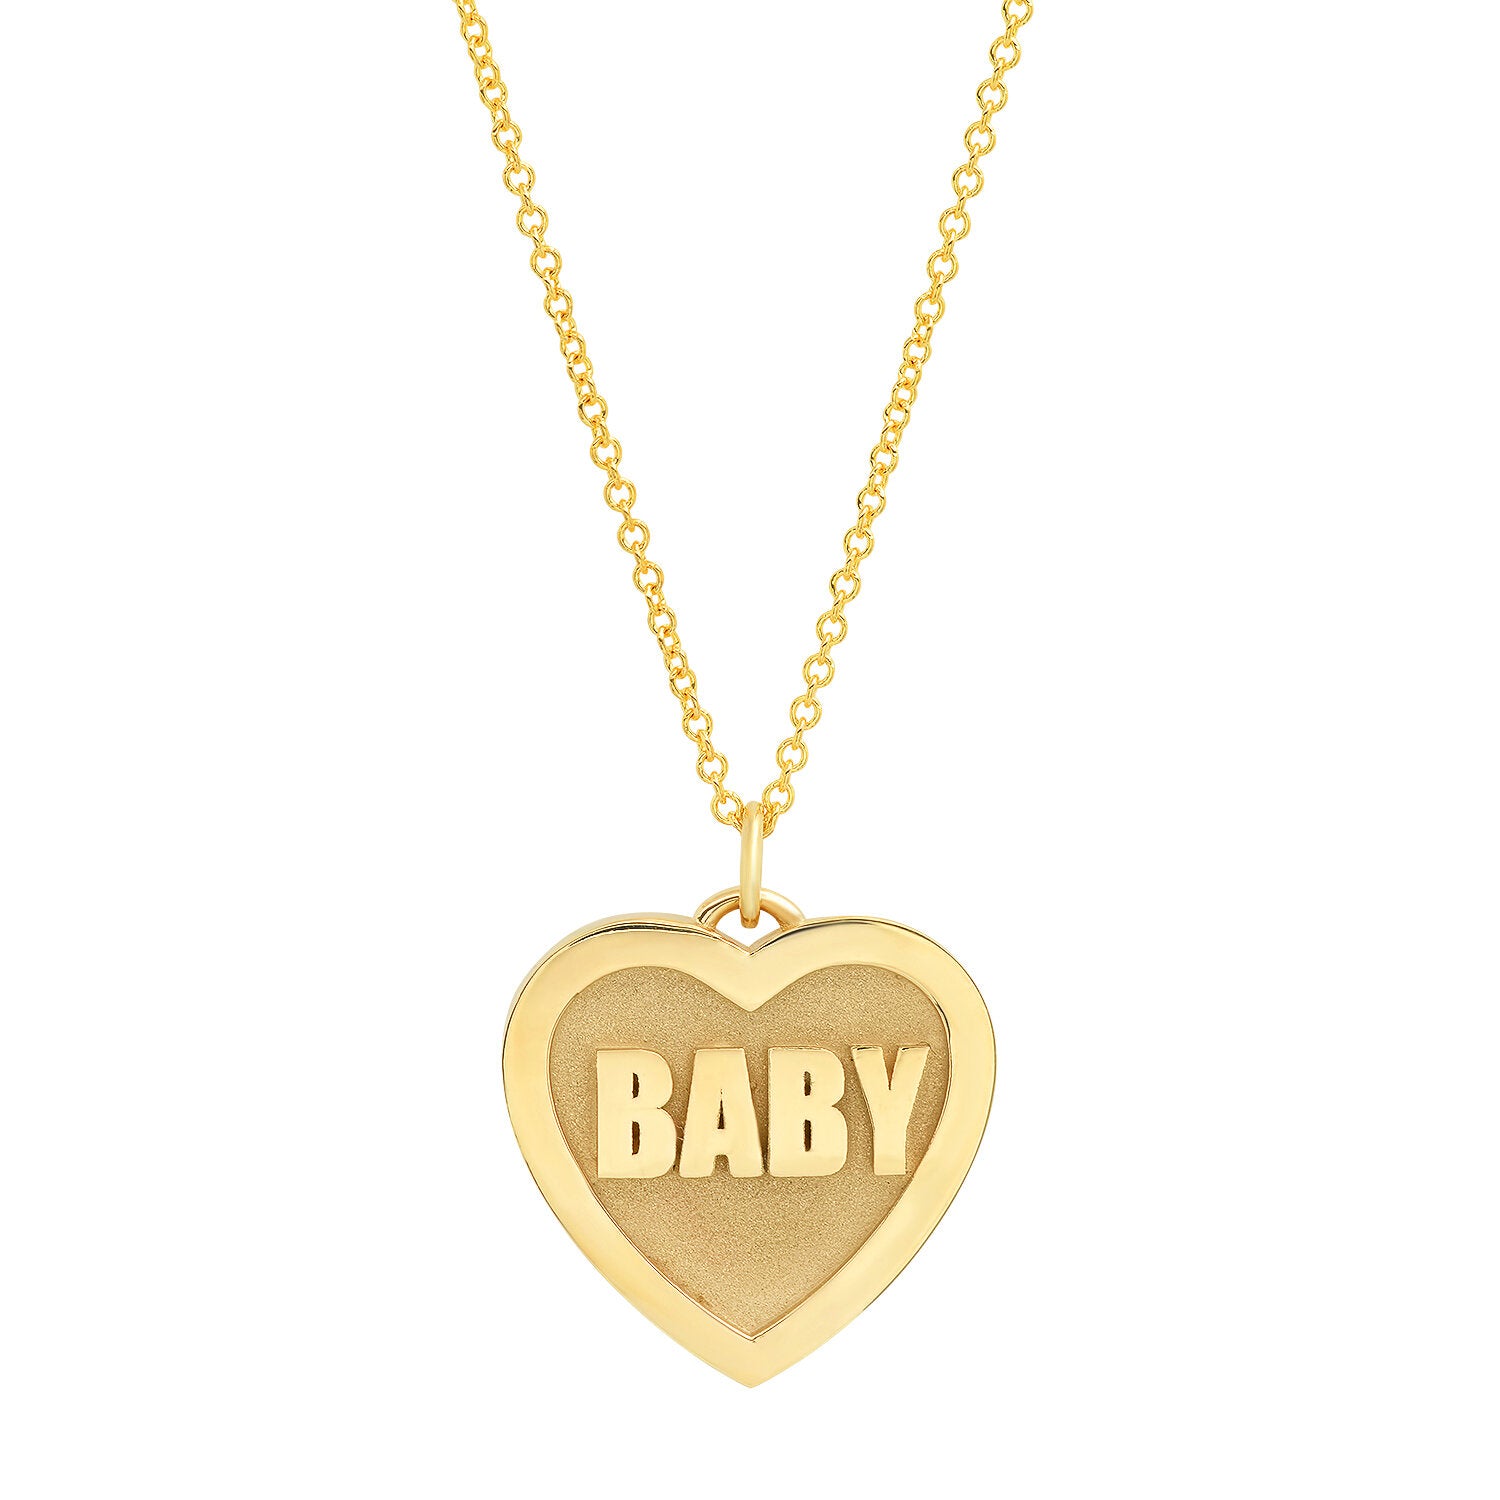 Baby Heart Pendant Necklace